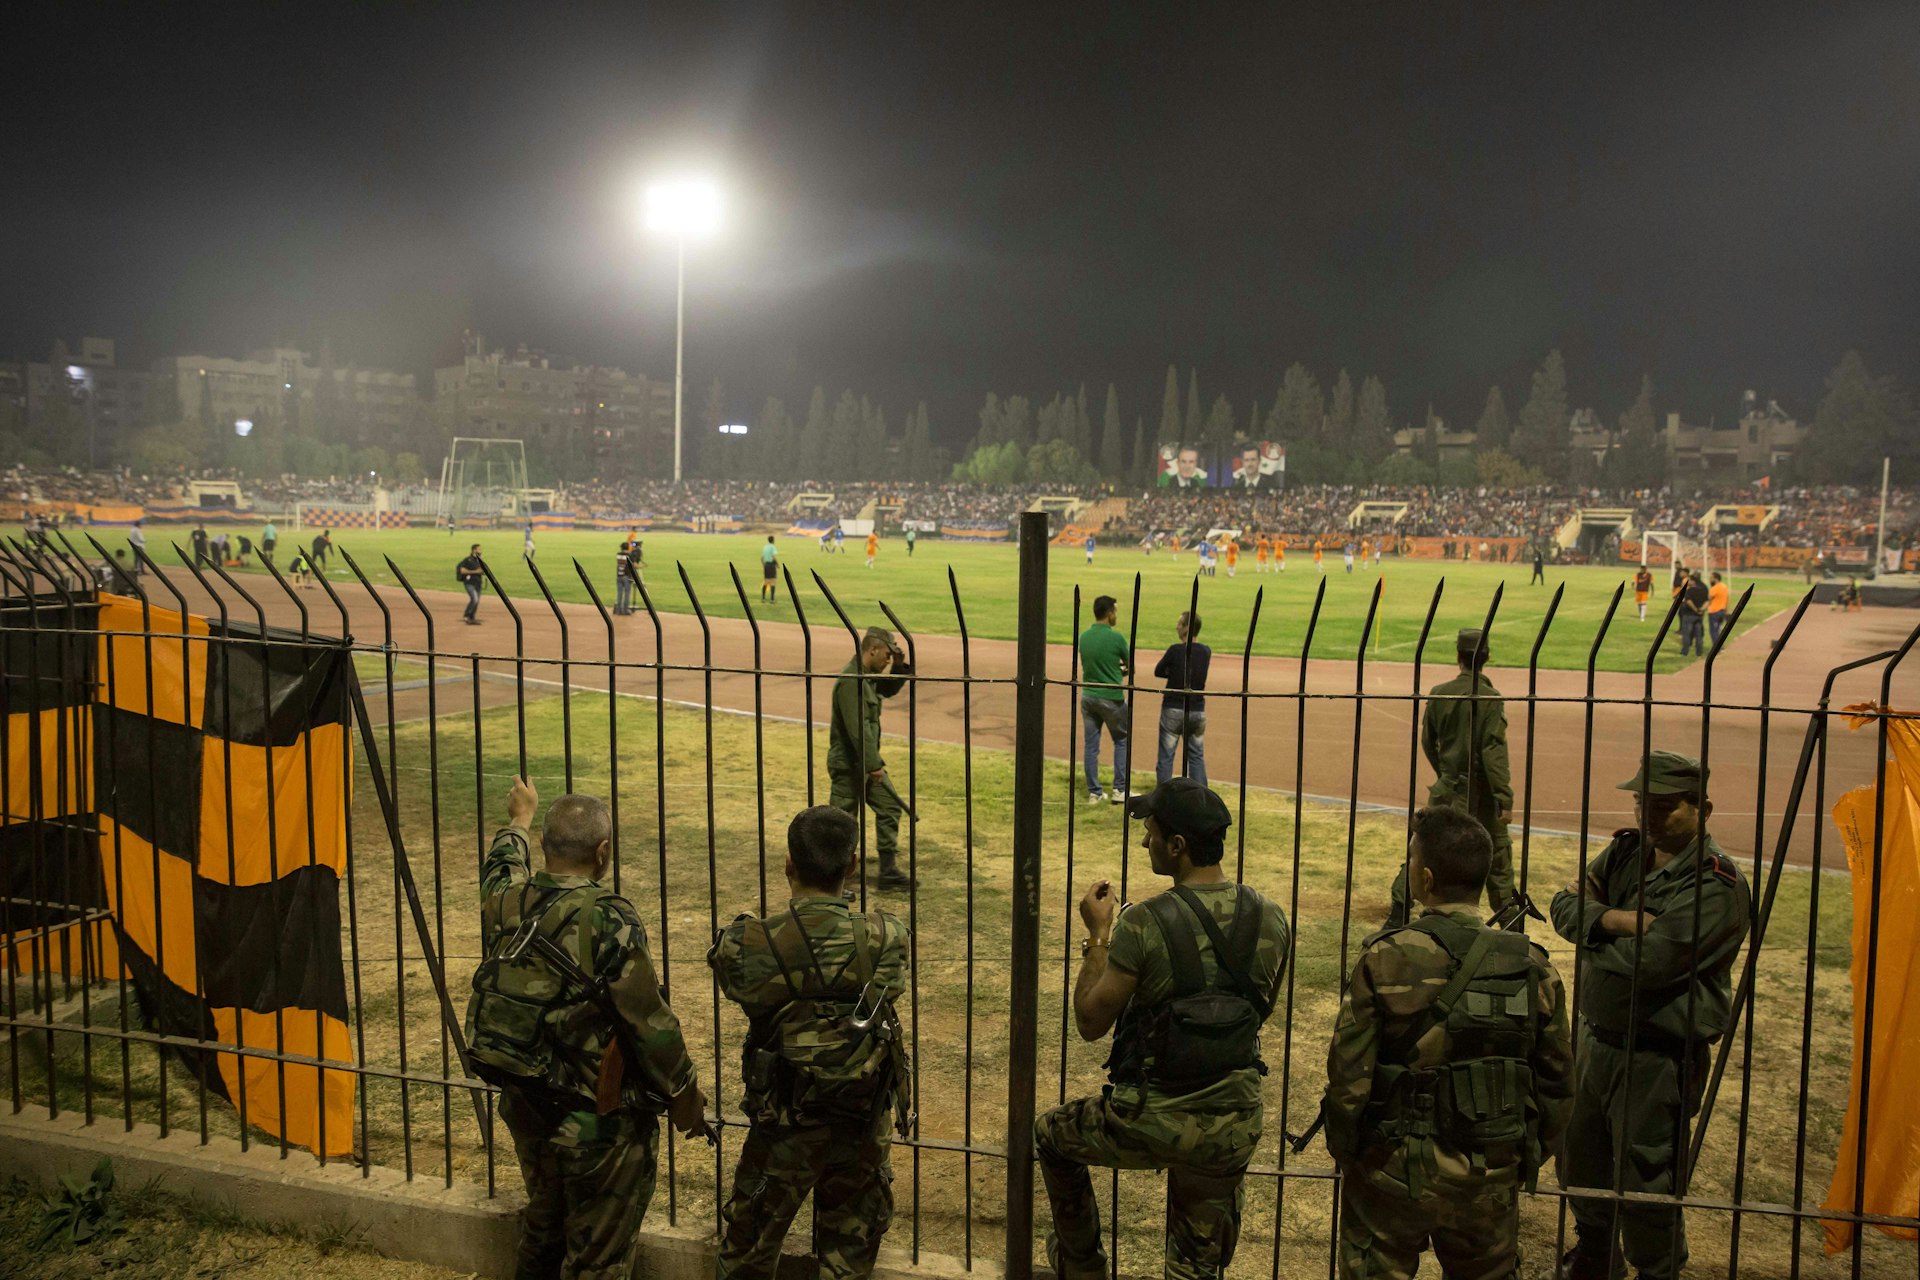 Soldiers line the pitch during the Syrian Cup final. Some also stood in the crowd, watching out for security breaches.